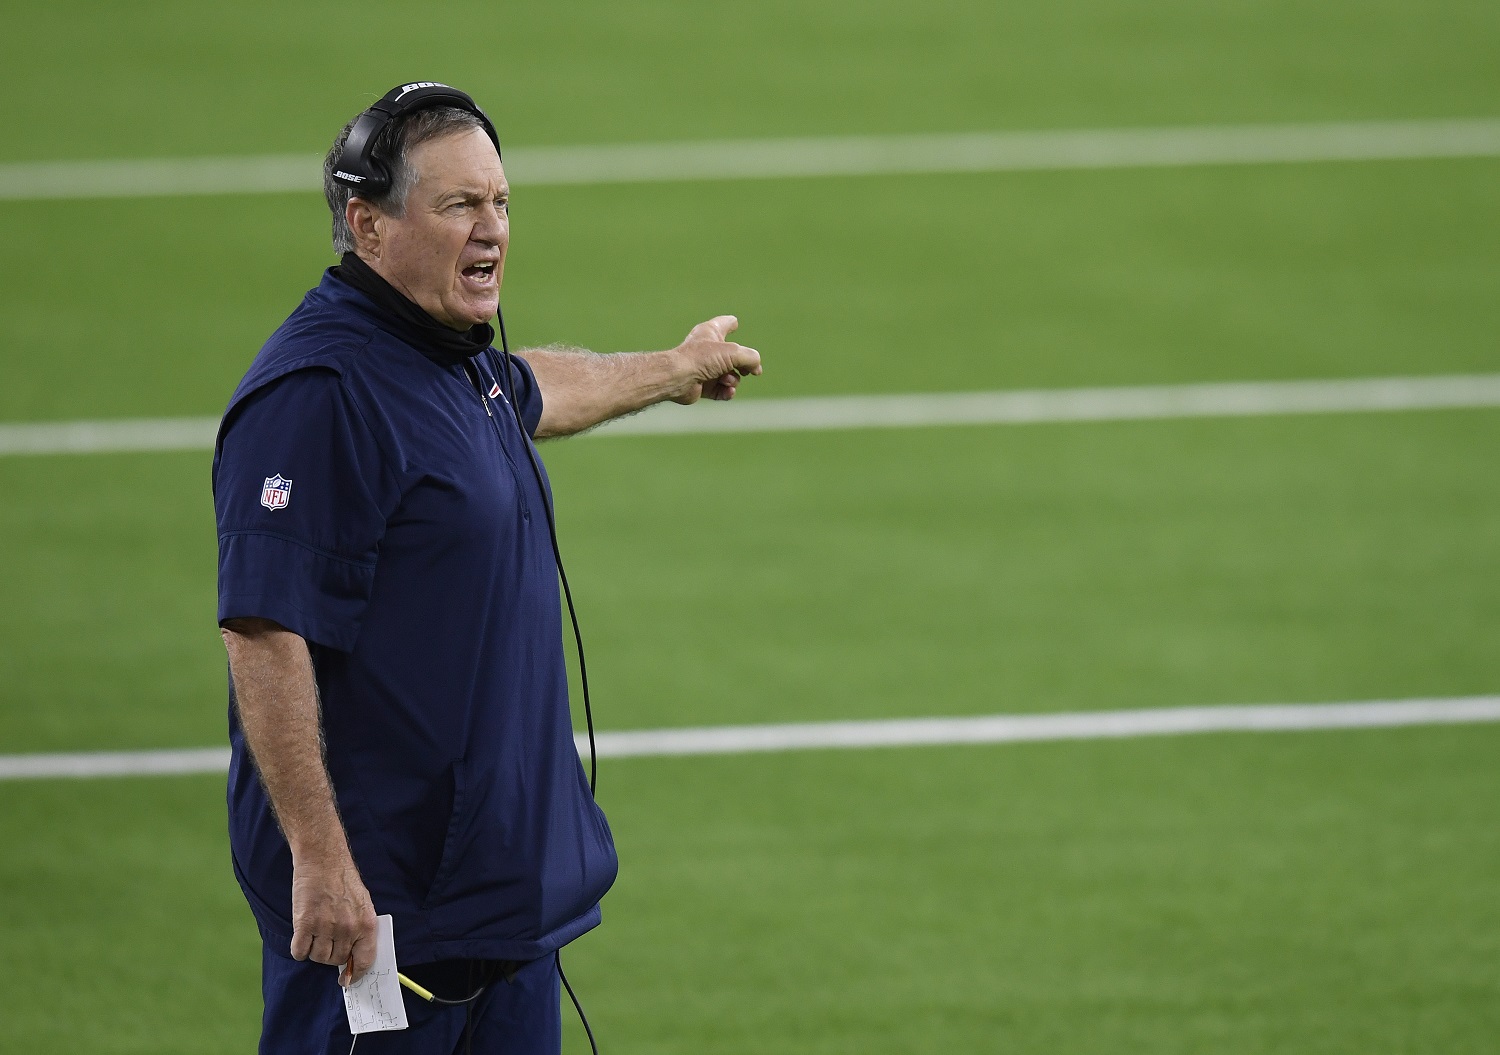 New England Patriots coach Bill Belichick complains to officials during a 24-3 Los Angeles Rams victory at SoFi Stadium on Dec. 10, 2020.